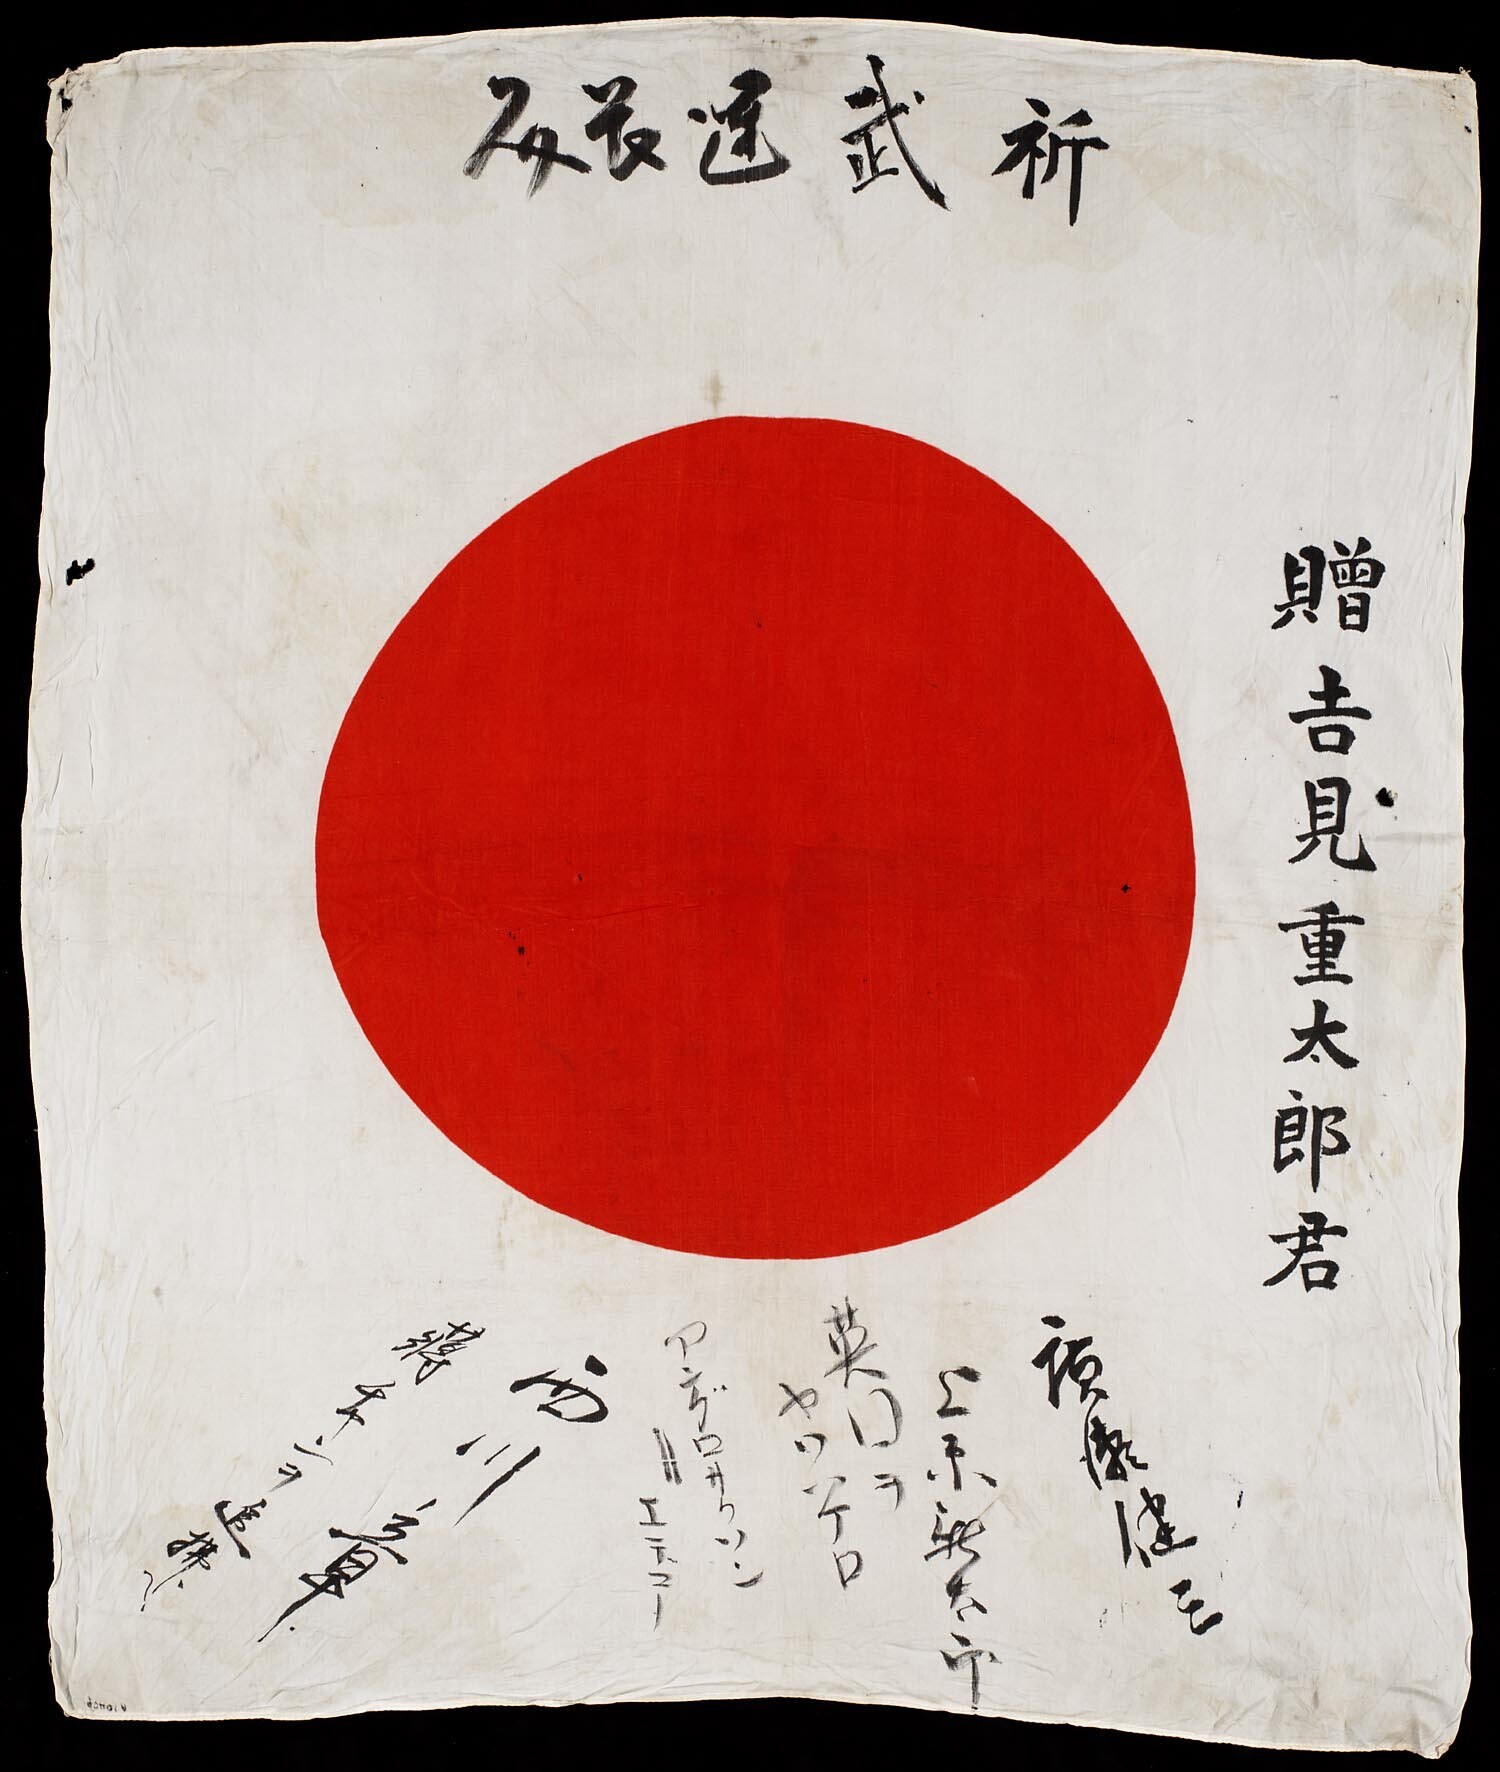 Japan - http://europeana.eu/portal/record/2021657/90401__1_2_.html. Museon - http://cc.museon.nl/default.aspx#id=%2090401%20(1/2). CC BY - http://creativecommons.org/licenses/by/3.0/